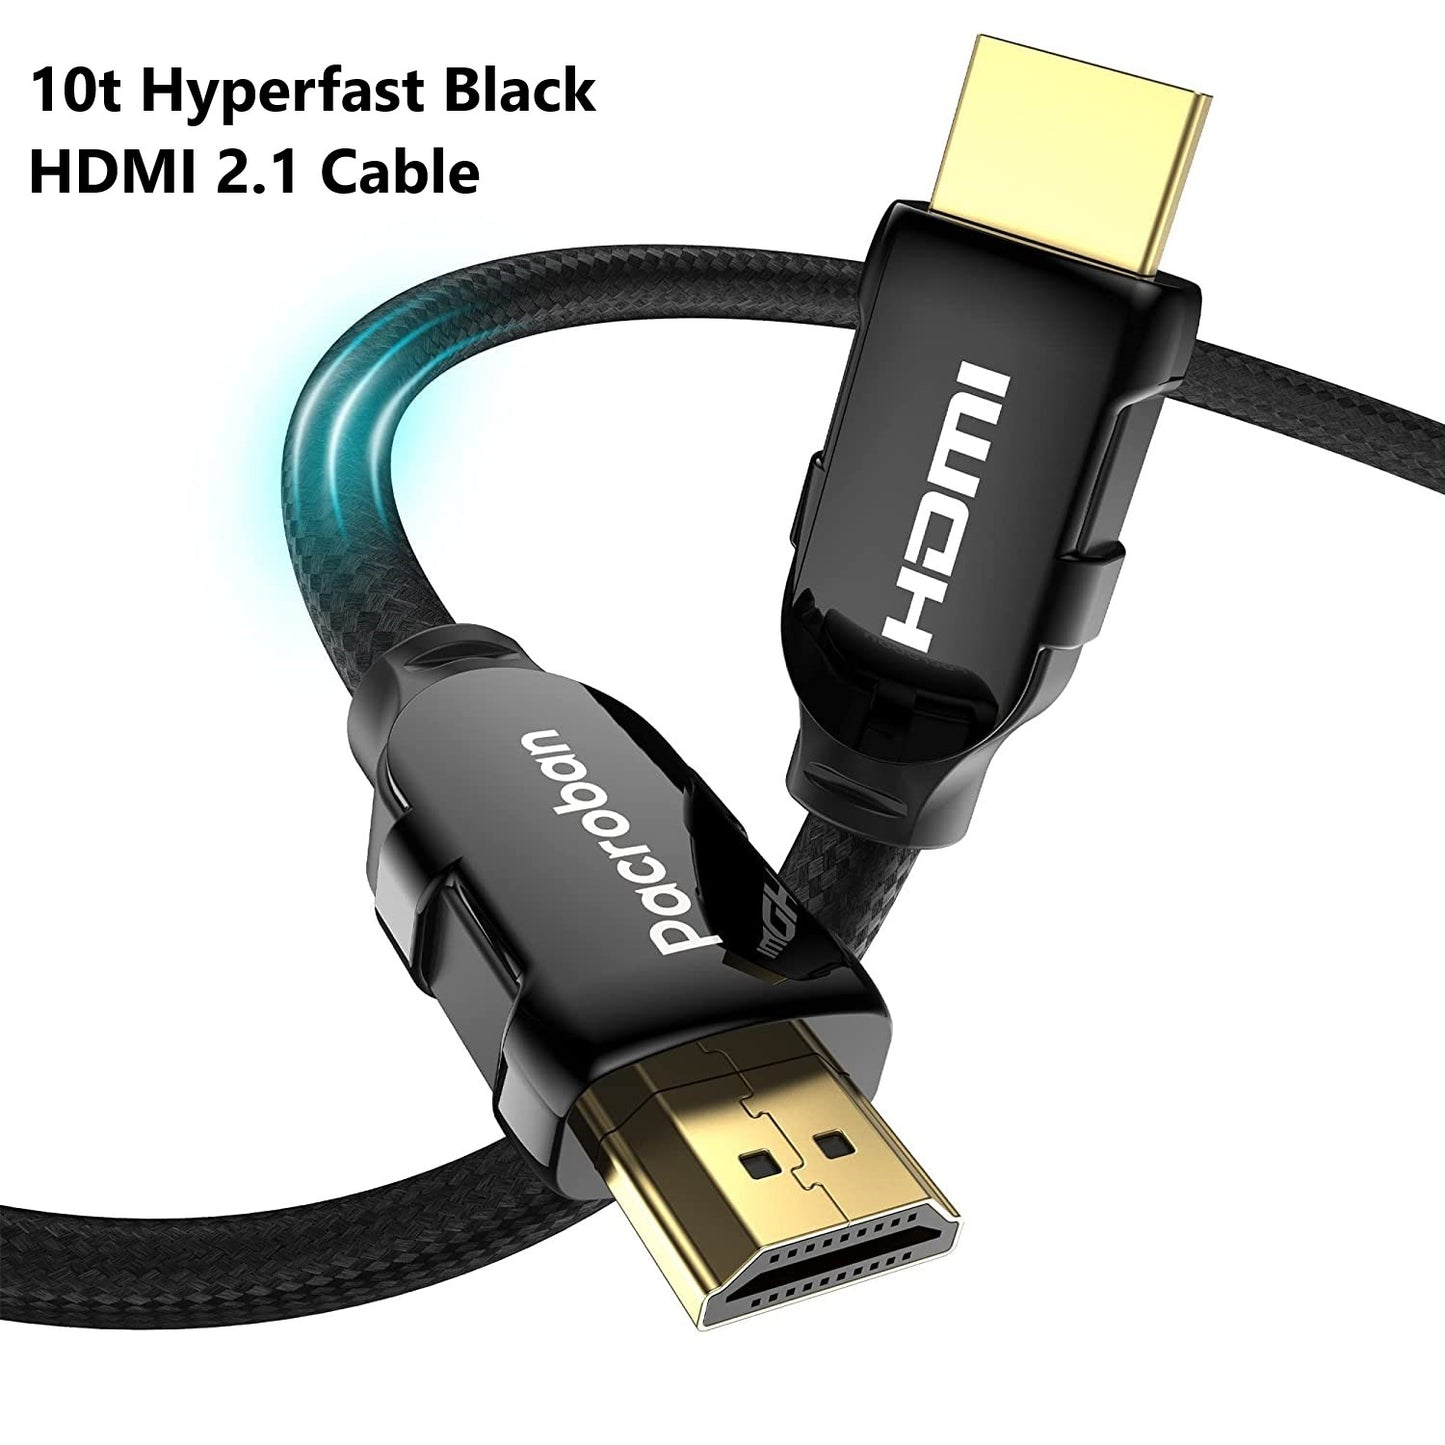 Multiple Open Box - Slim HDMI, HDMI 2.1 Cable, USB C to USB Cables, USB to VGA adapter Box